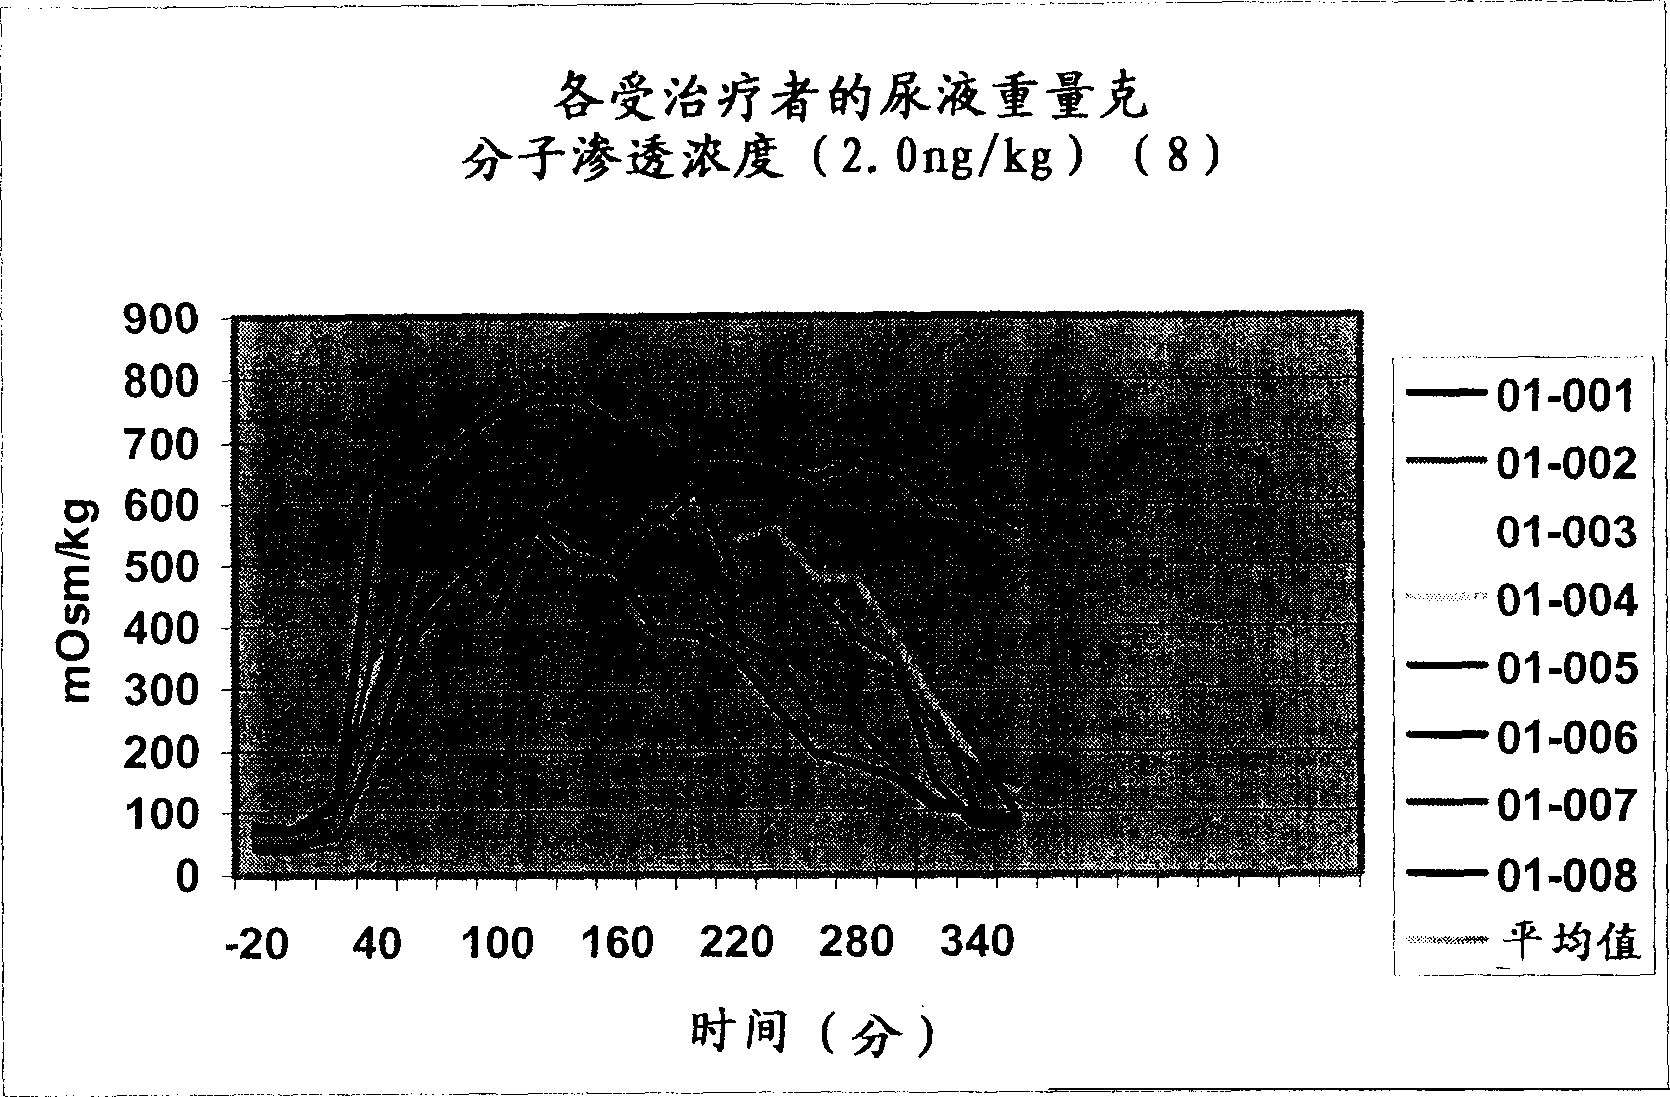 Pharmaceutical compositions including low dosages of desmopressin